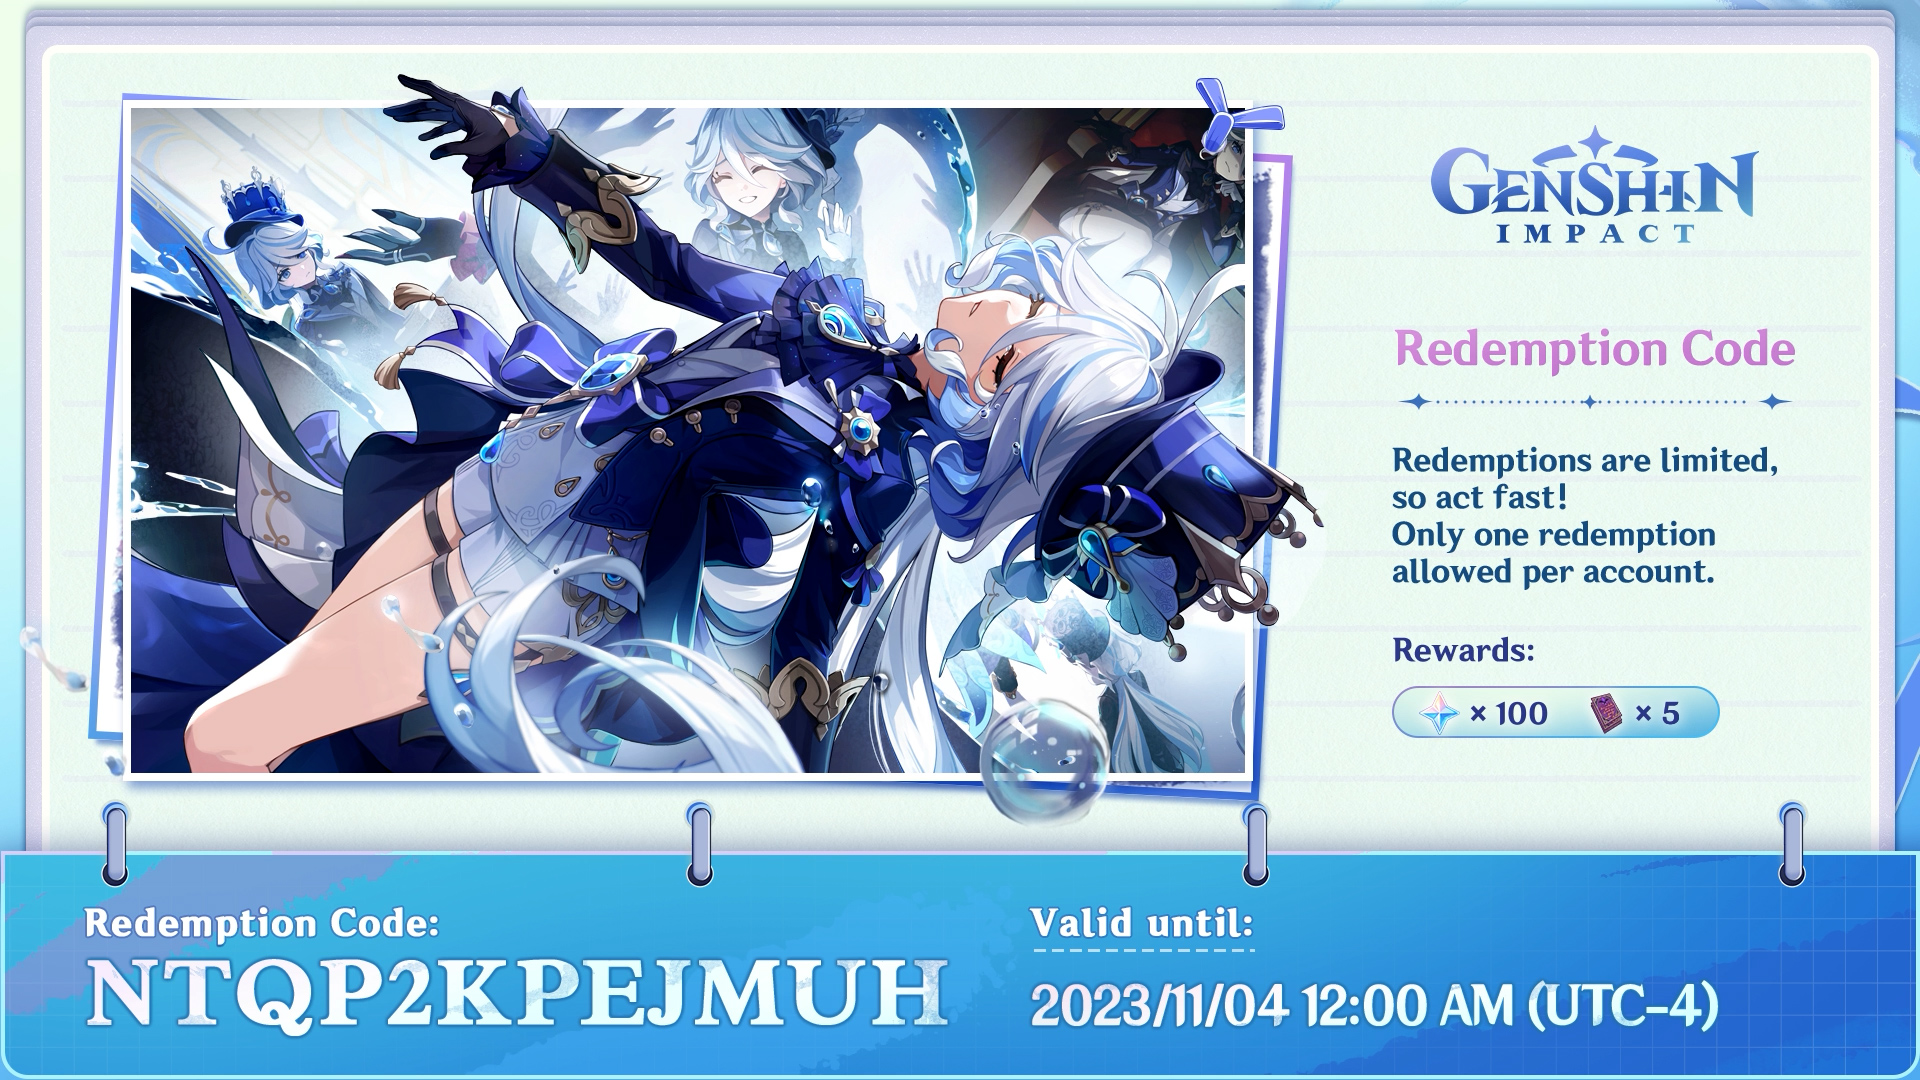 Genshin Impact on X: Travelers, here are the redemption codes for